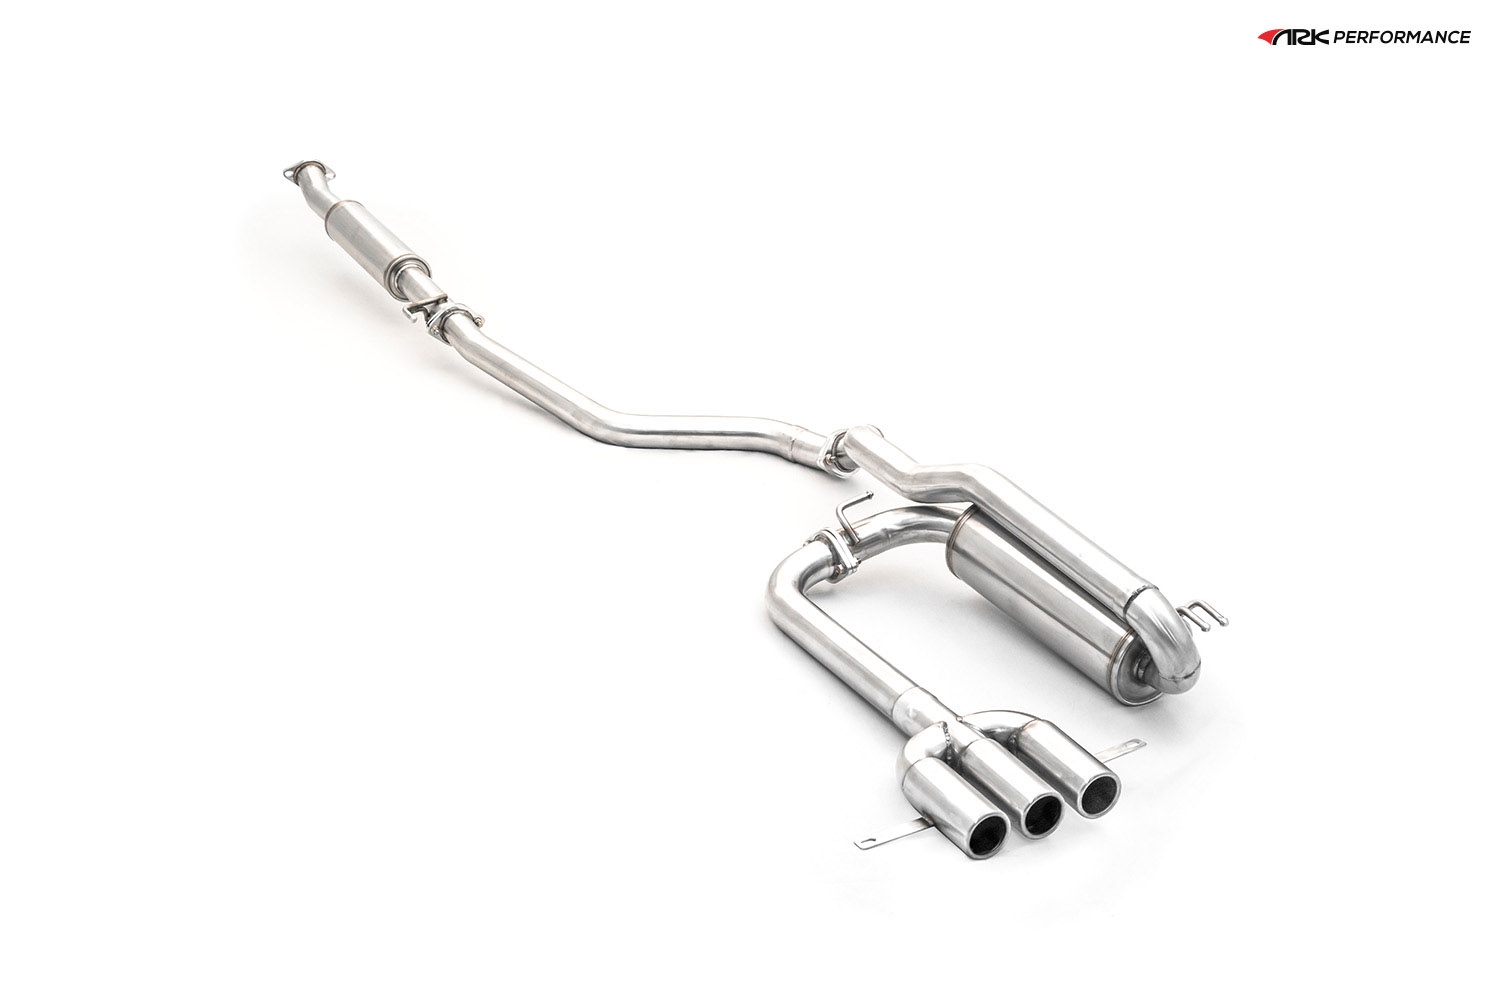 Ark Performance Stainless Steel DT-S Cat-Back Exhaust System 2.5in Pipe w/ 2.0 Polished Triton Tip, Single Exit - Hyundai Veloster 11-17 1.6L I4 FS